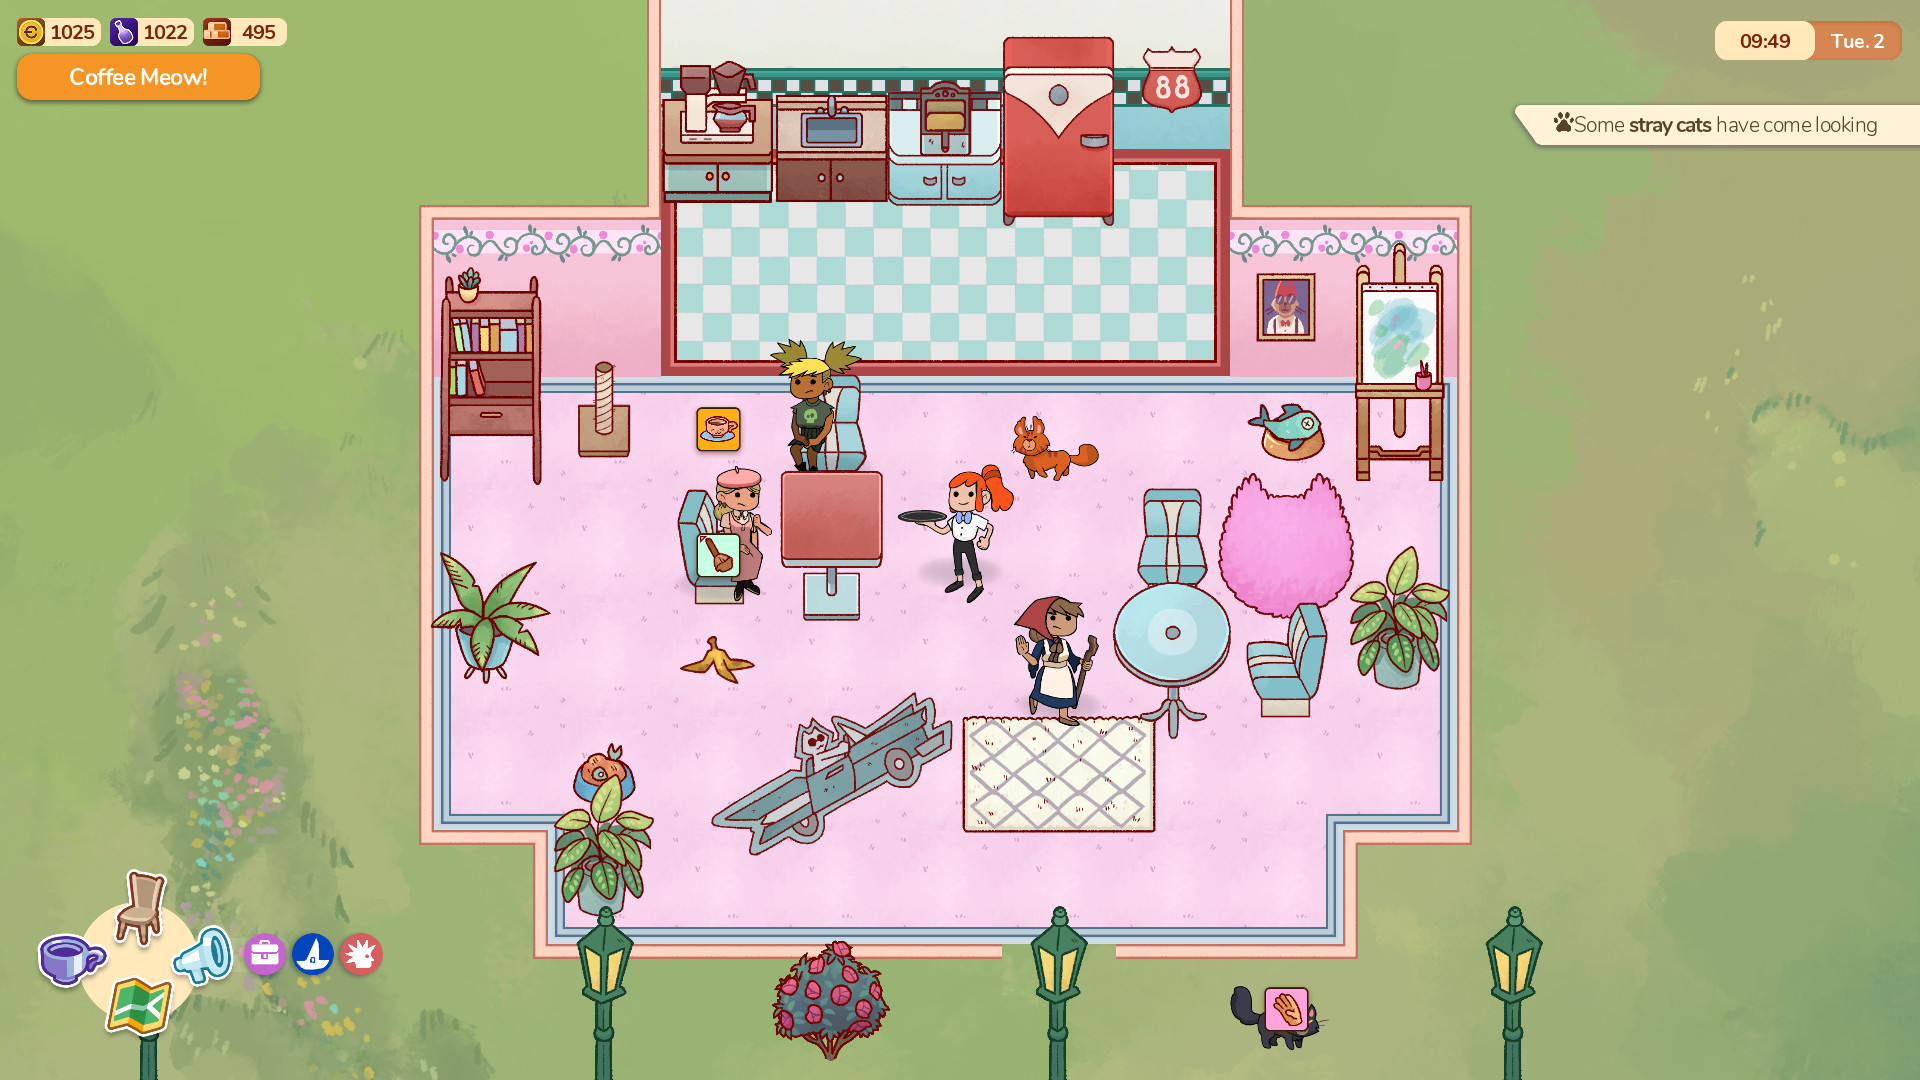 Cat Cafe Manager Steam CD Key